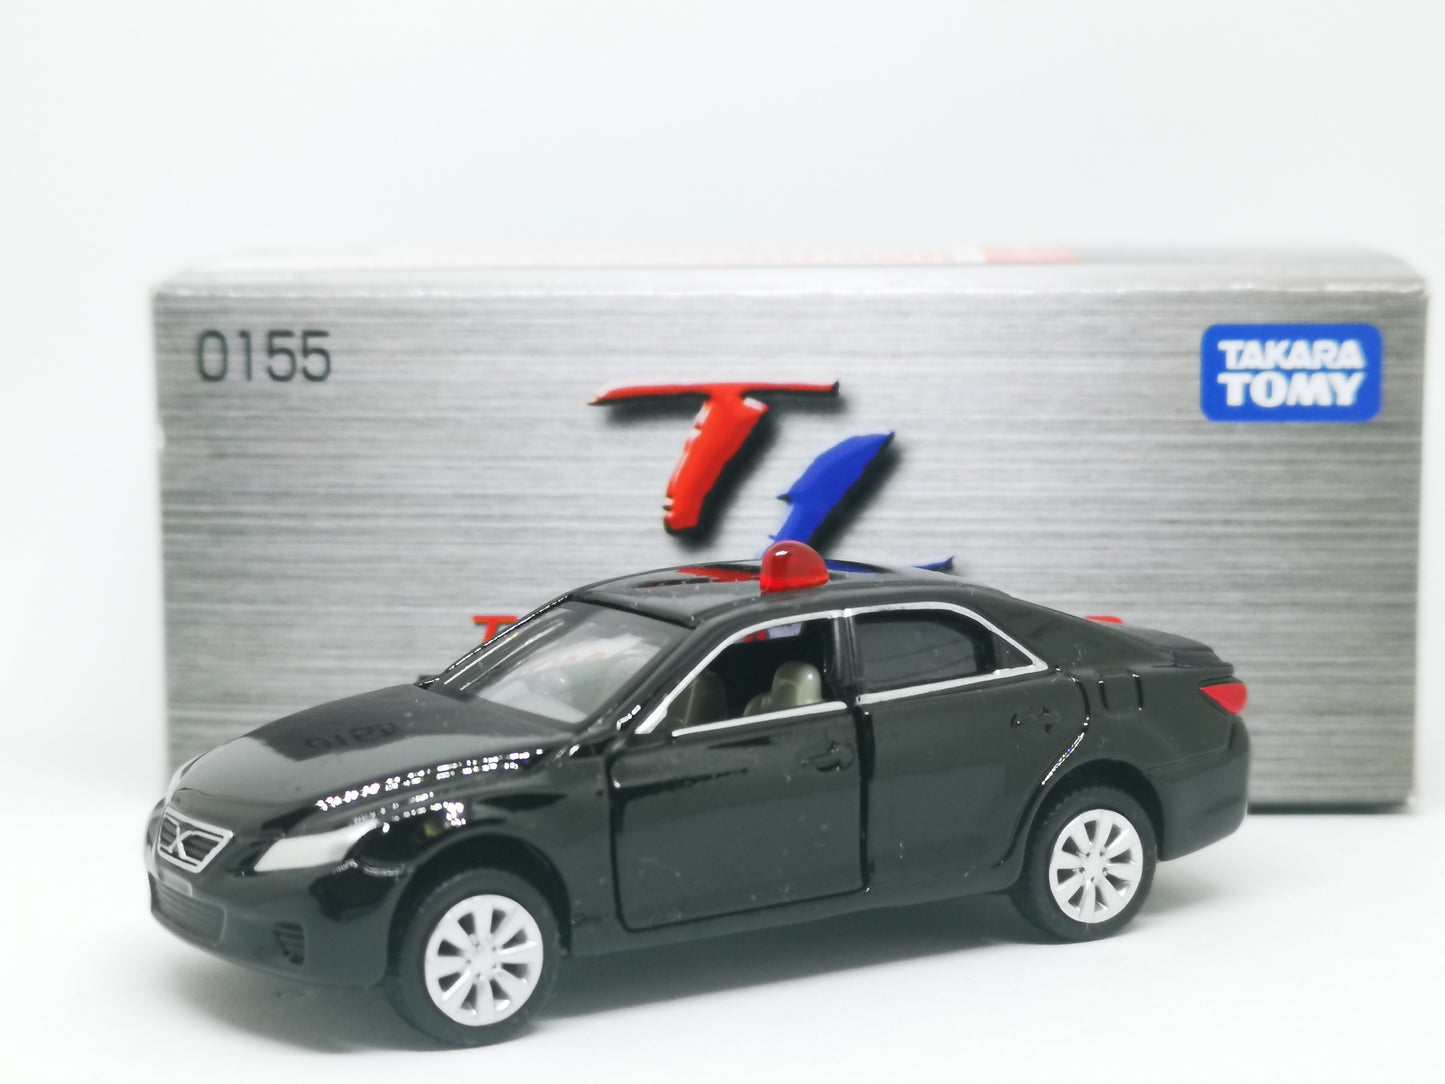 Tomica Limited No.155 Toyota Mark X unmarked Police Car